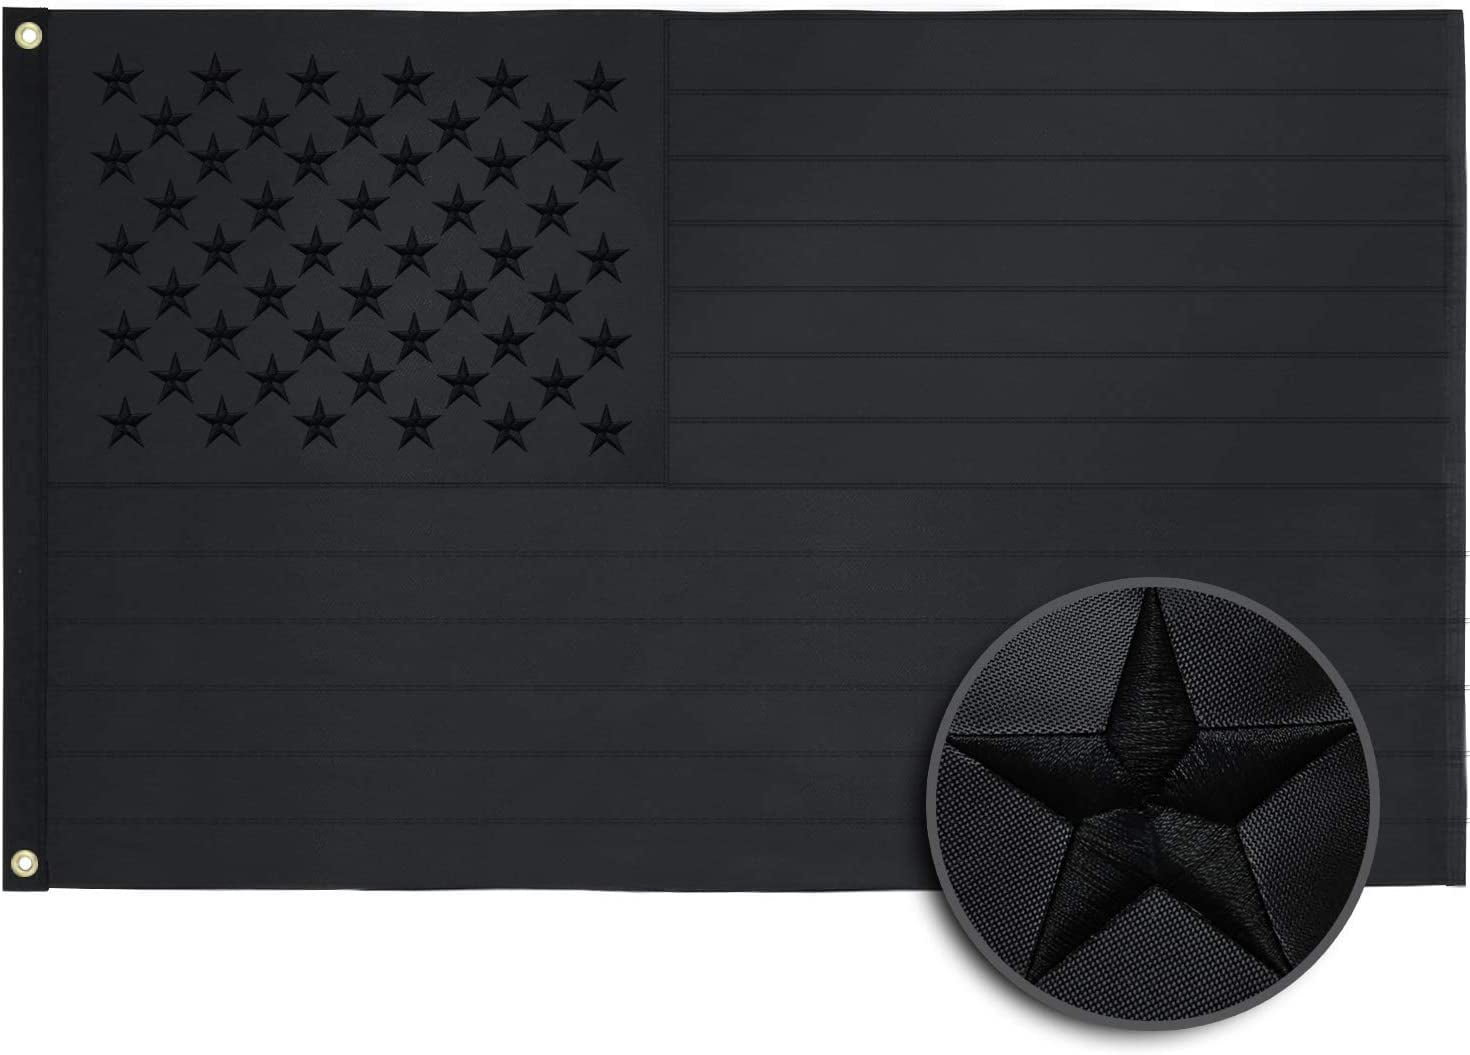 2X Black American Flag 3x5 ft 210D Embroidered US USA Blackout Tactical GROMMET